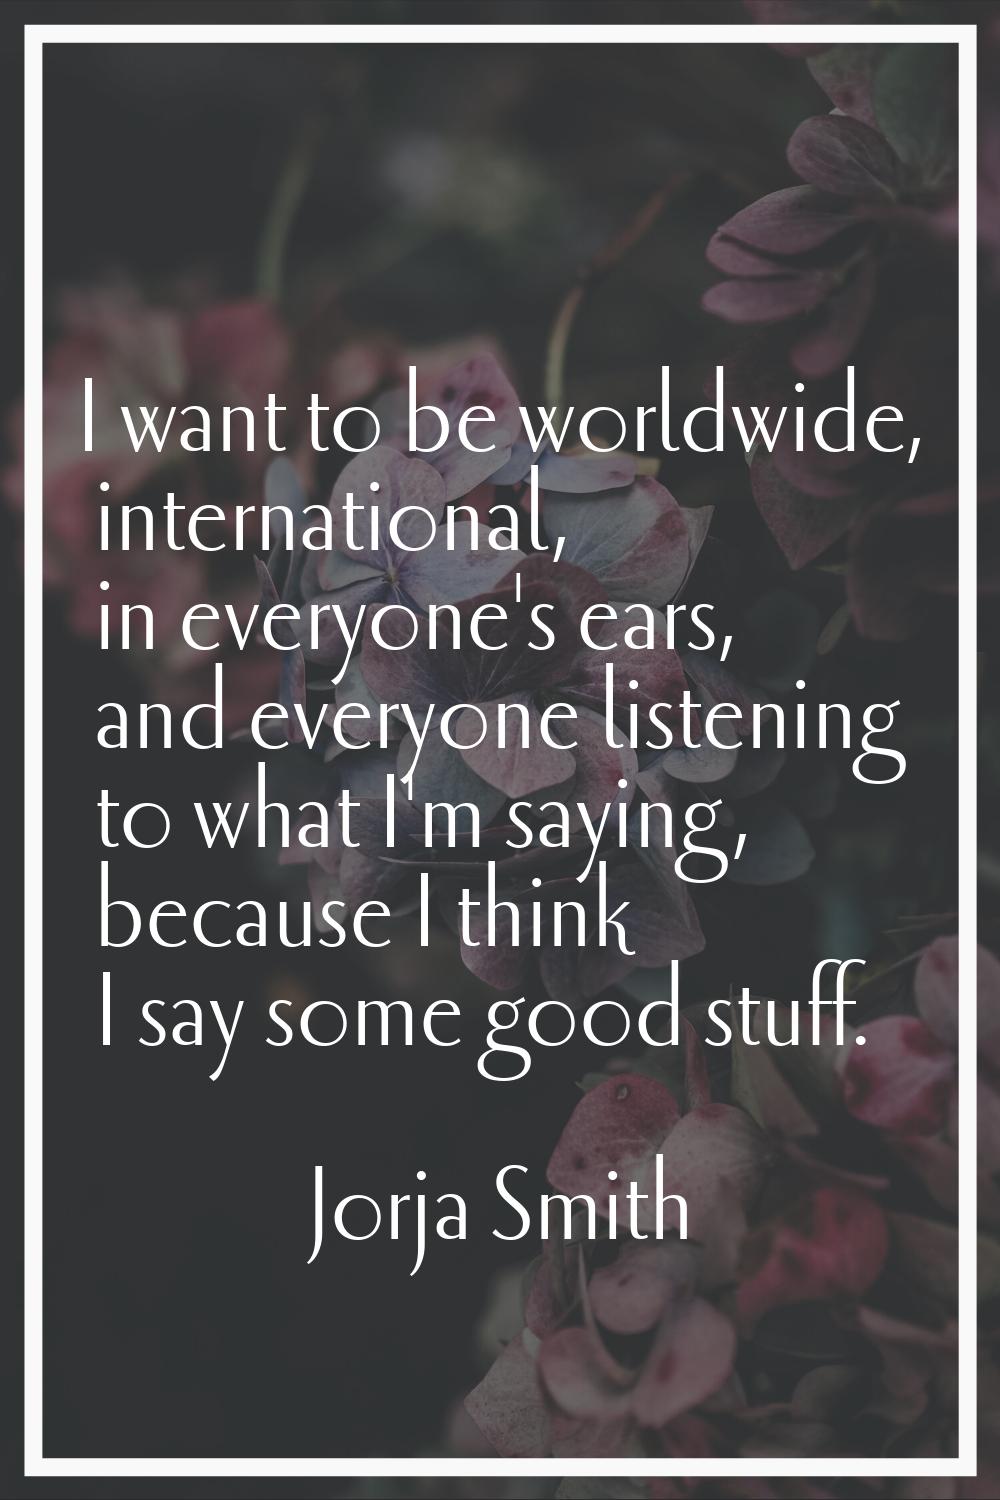 I want to be worldwide, international, in everyone's ears, and everyone listening to what I'm sayin